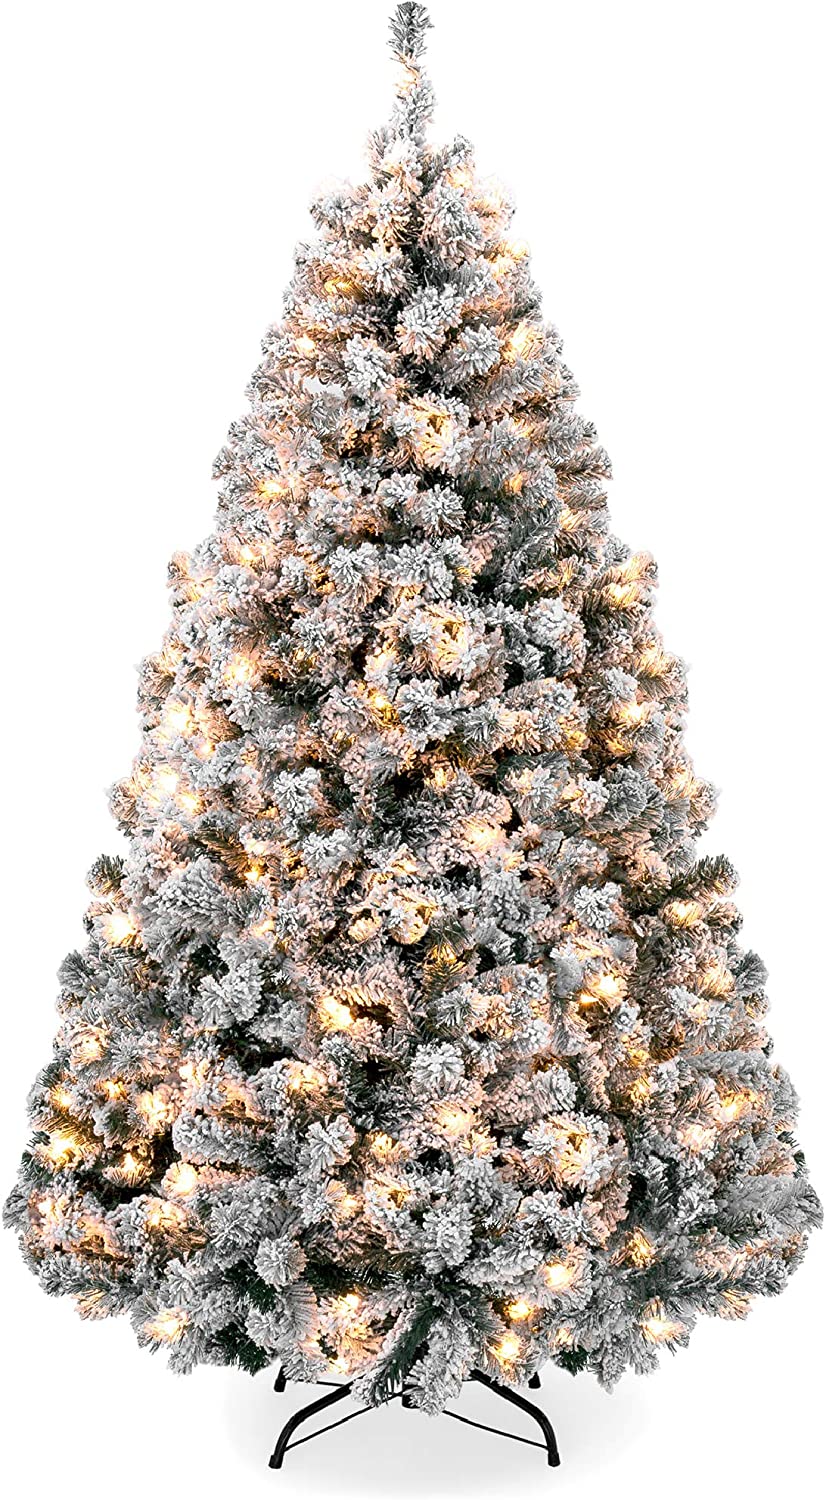  4. Pre-Lit Flocked Hinged Christmas Pine Tree by Best Choice Products 